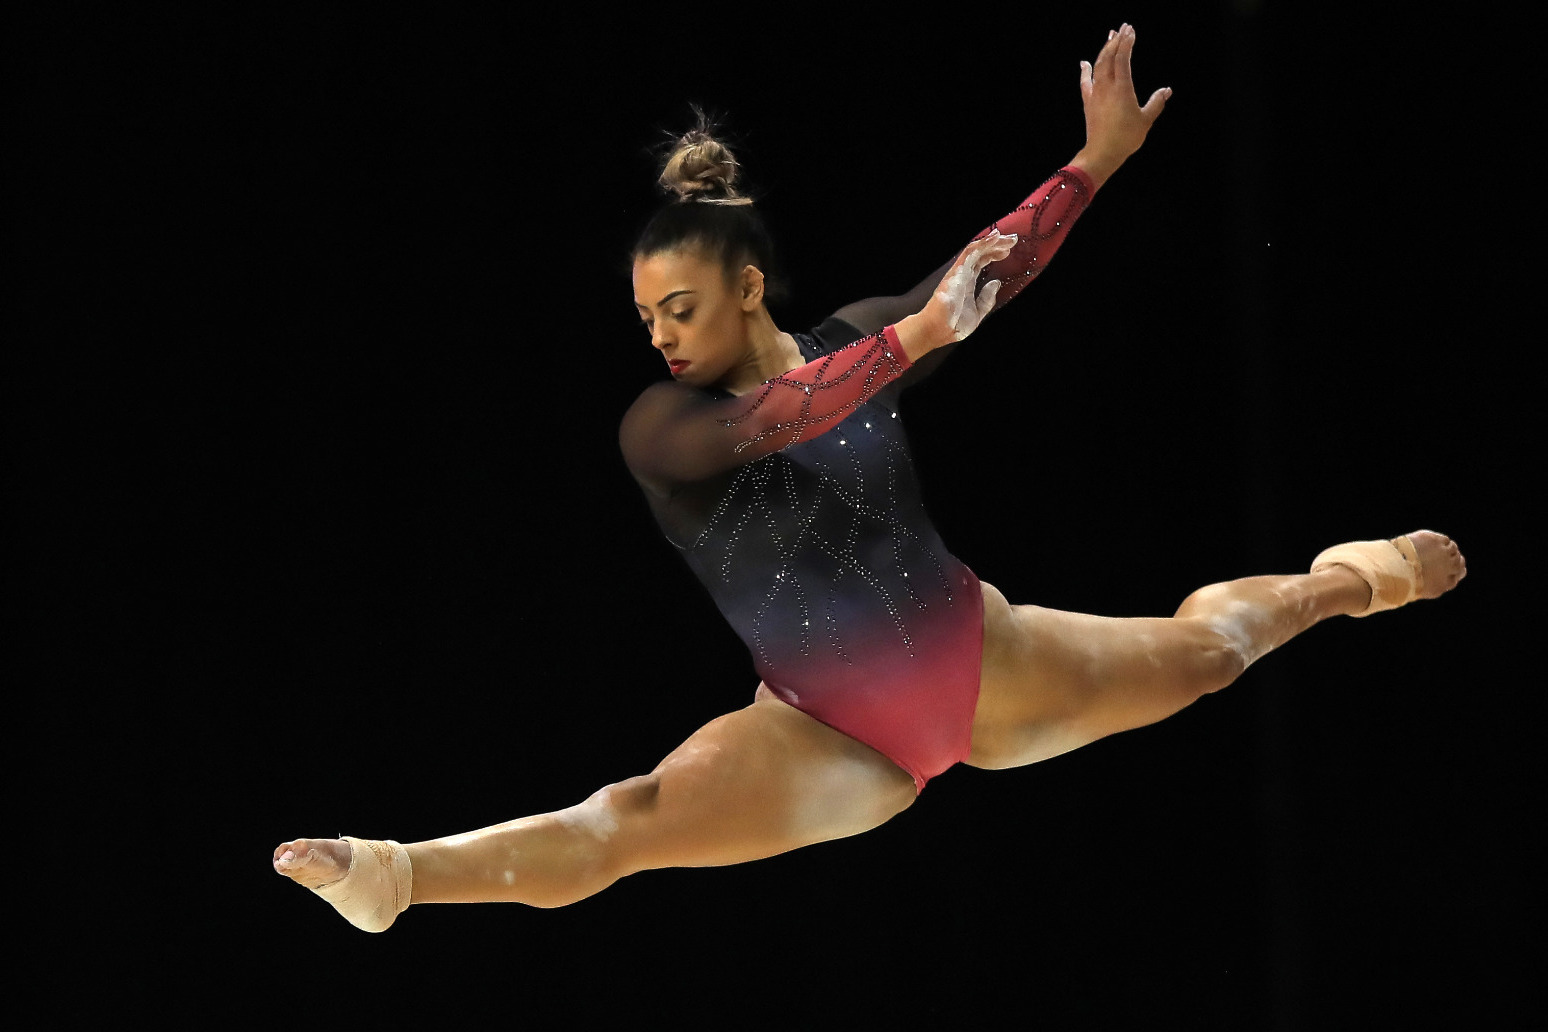 Gymnast Ellie Downie retires aged 23 to prioritise ‘mental health and happiness’ 